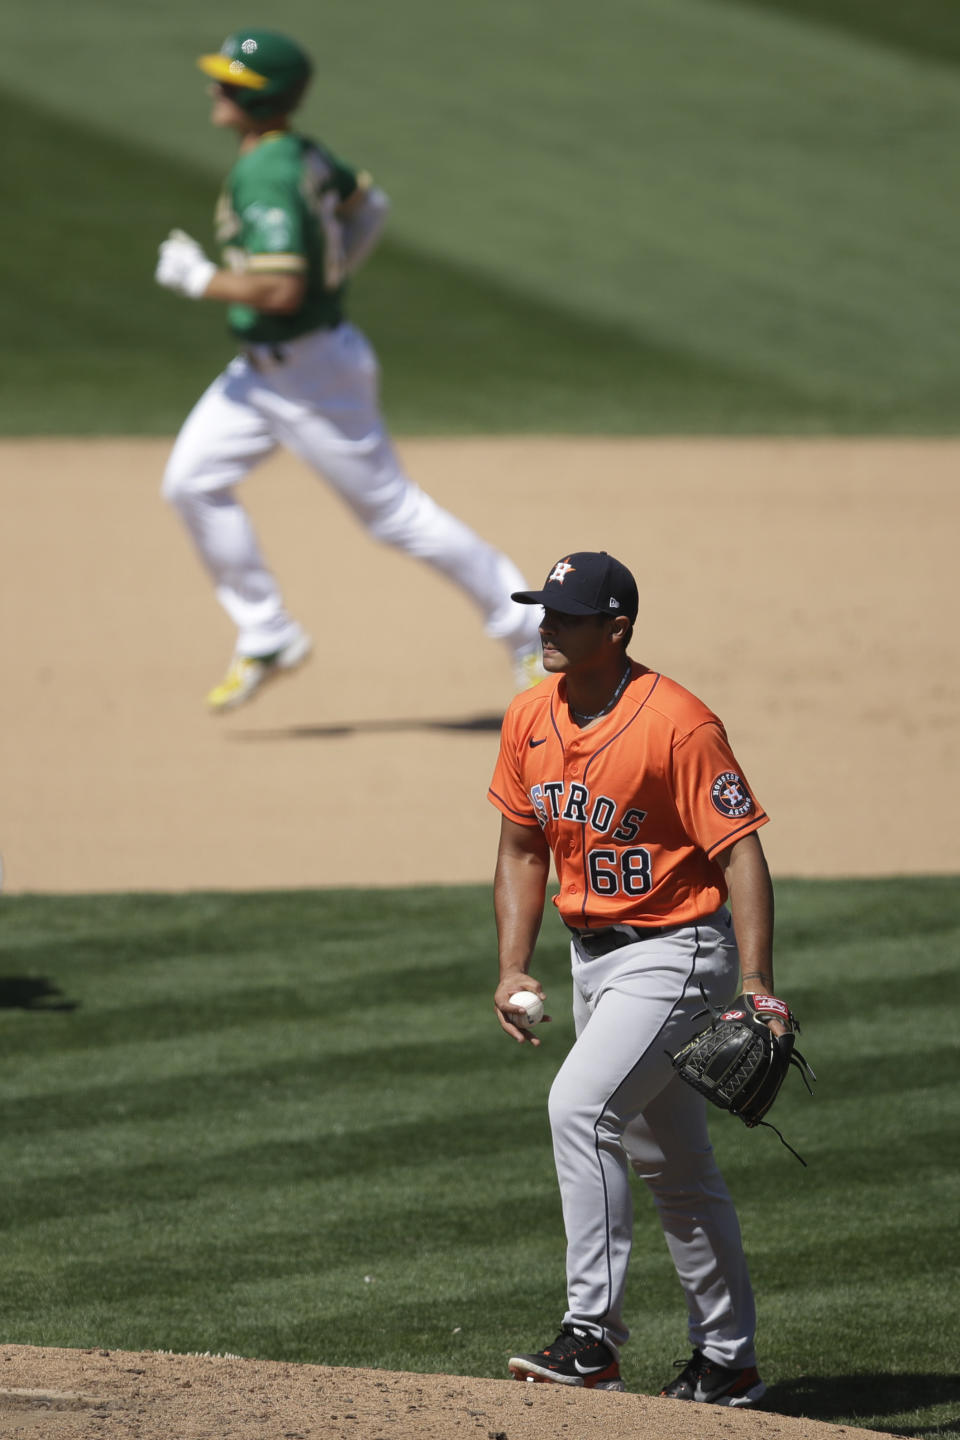 Houston Astros' Nivaldo Rodriguez (68) waits for Oakland Athletics' Matt Chapman to run the bases after hitting a home run in the eighth inning of a baseball game Saturday, Aug. 8, 2020, in Oakland, Calif. (AP Photo/Ben Margot)